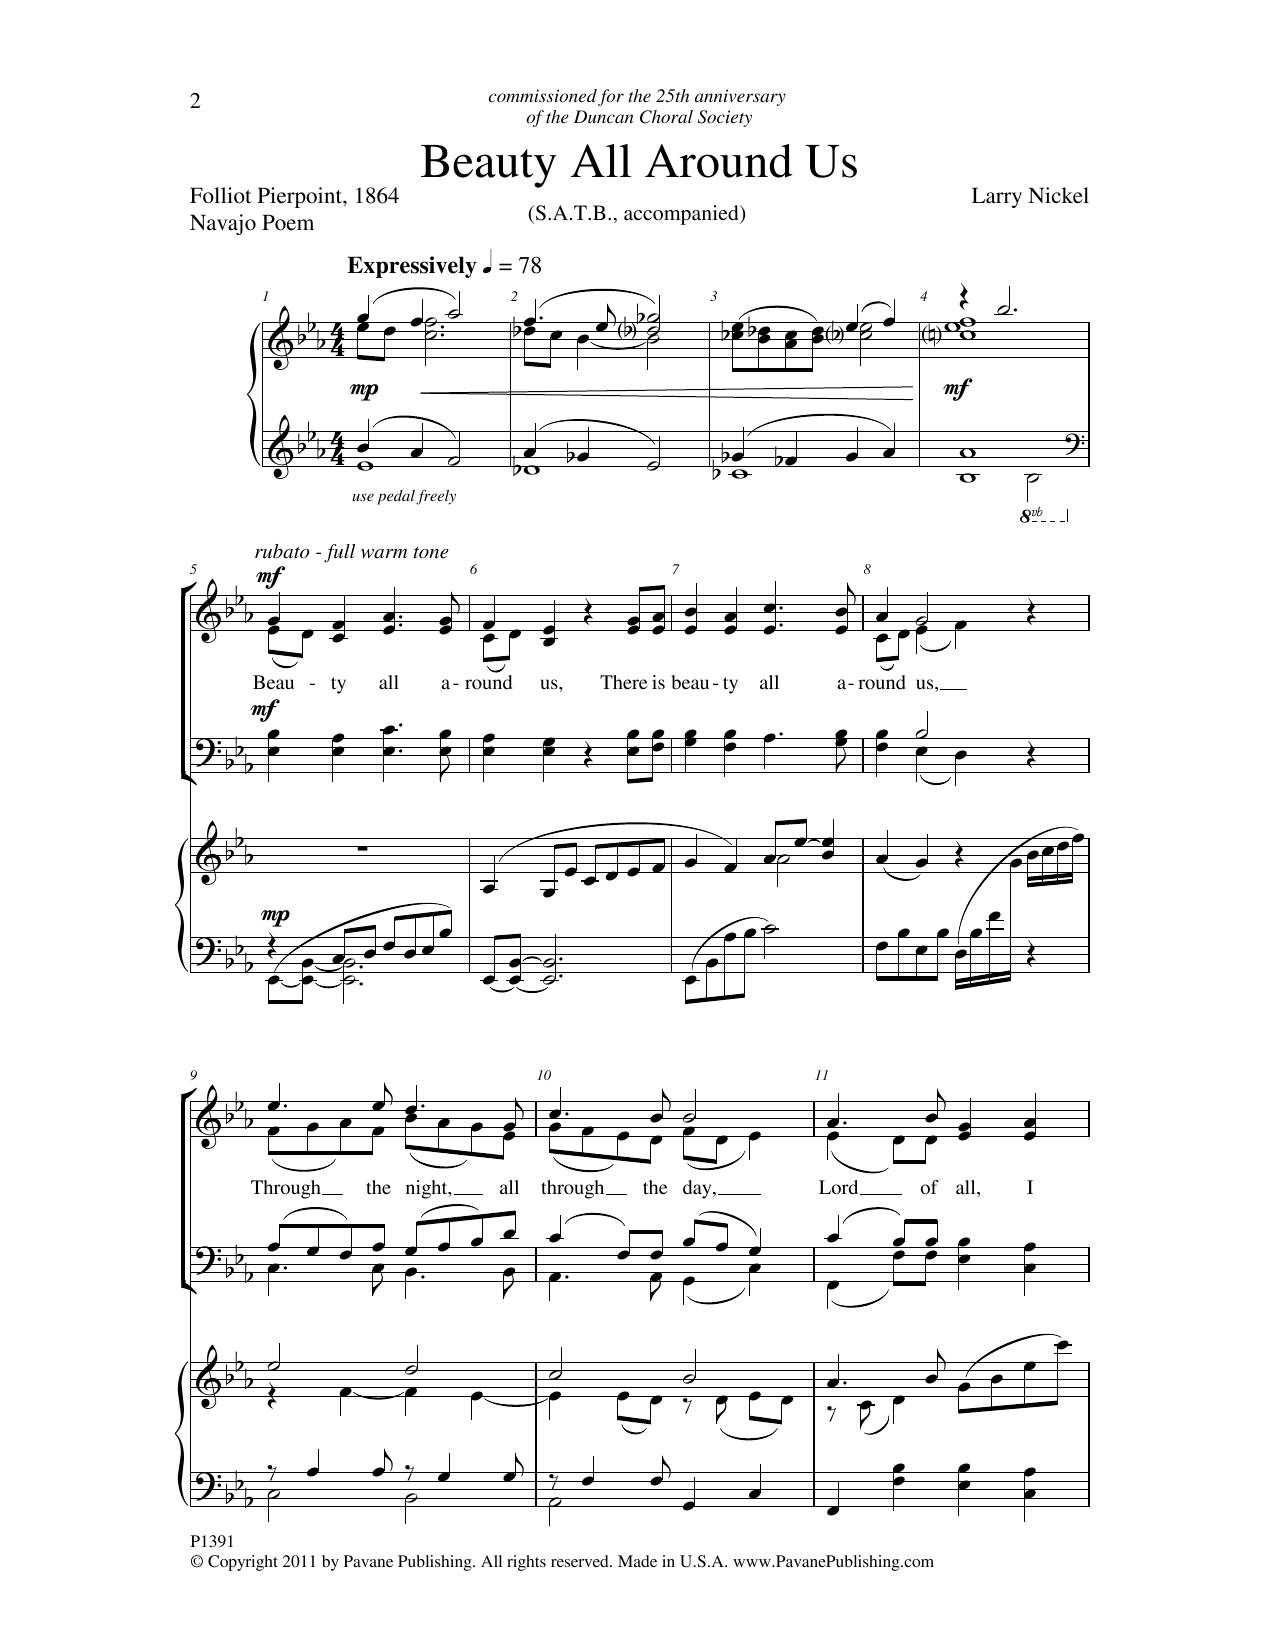 Larry Nickel Beauty All Around Us sheet music notes and chords. Download Printable PDF.